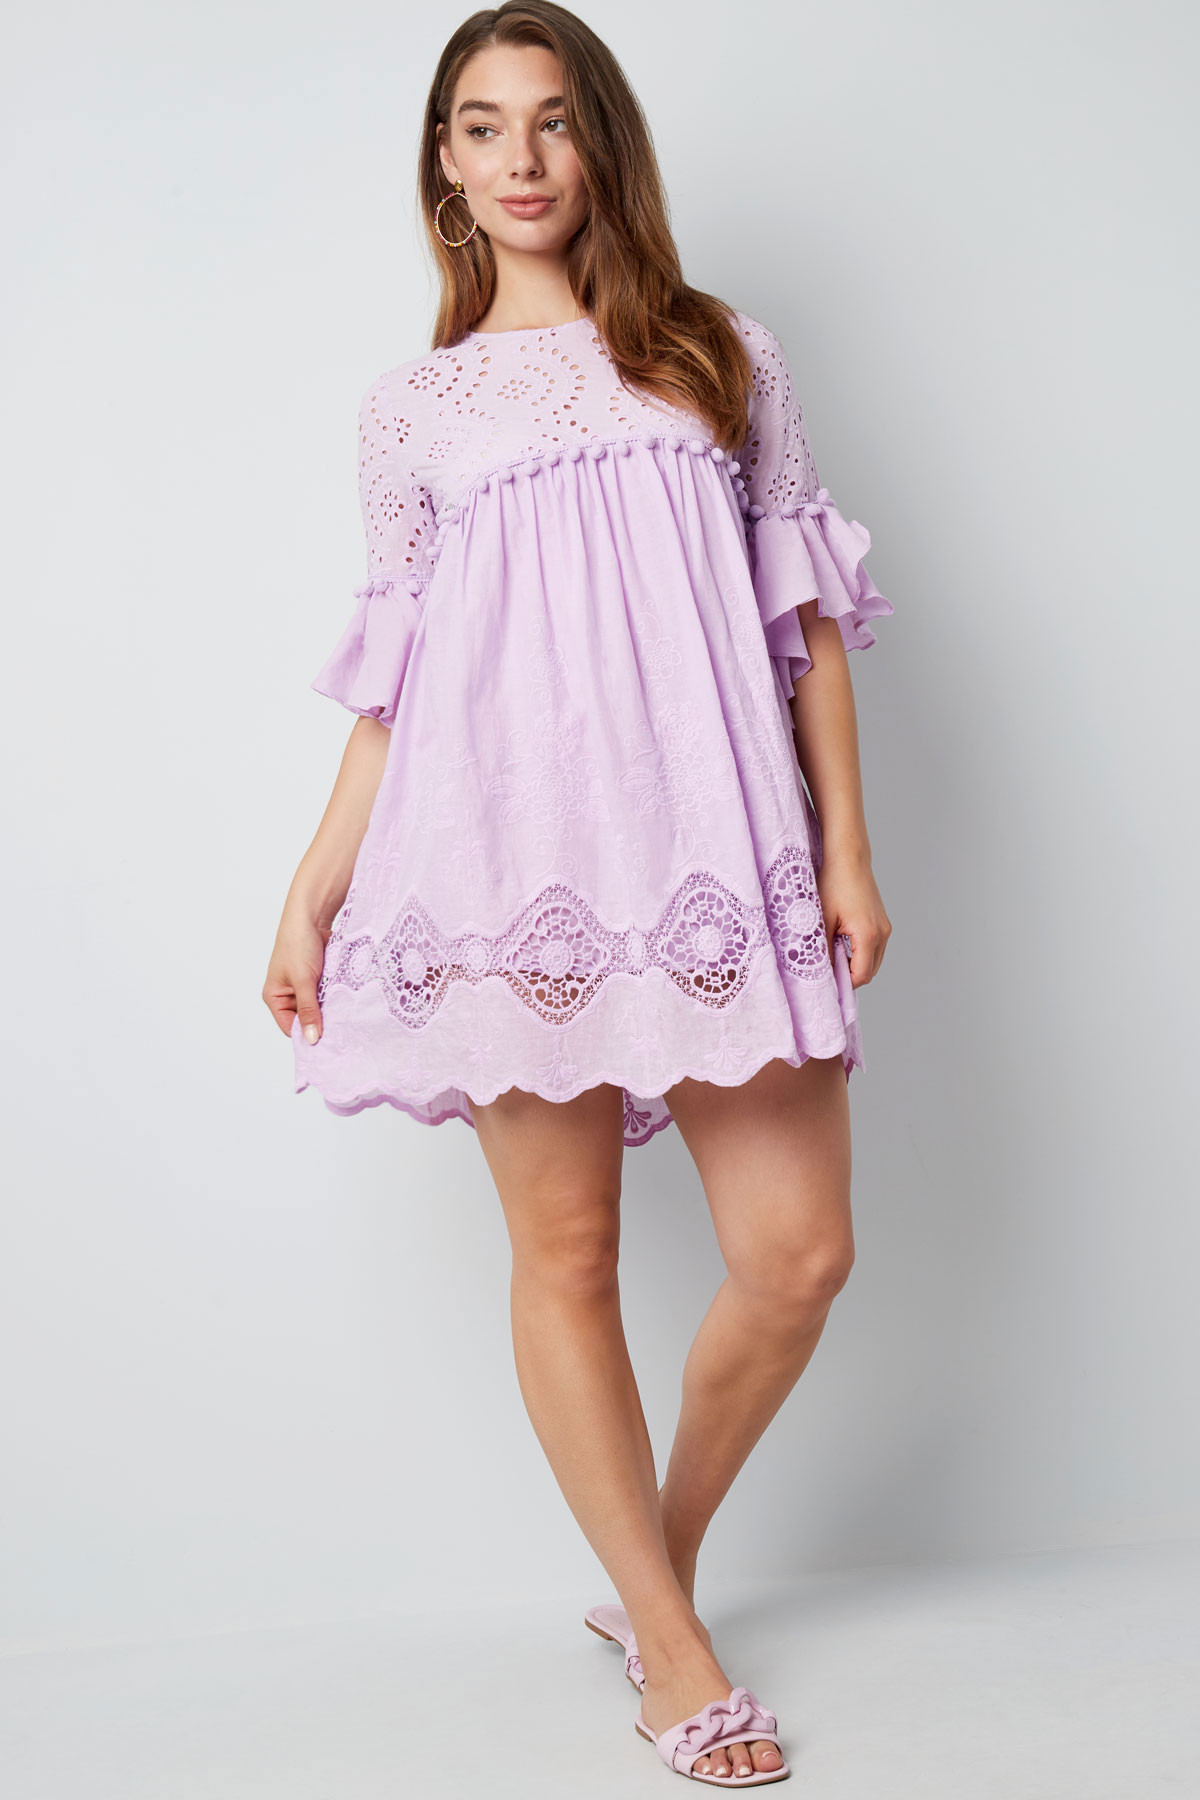 Dress embroidered details lilac h5 Picture9